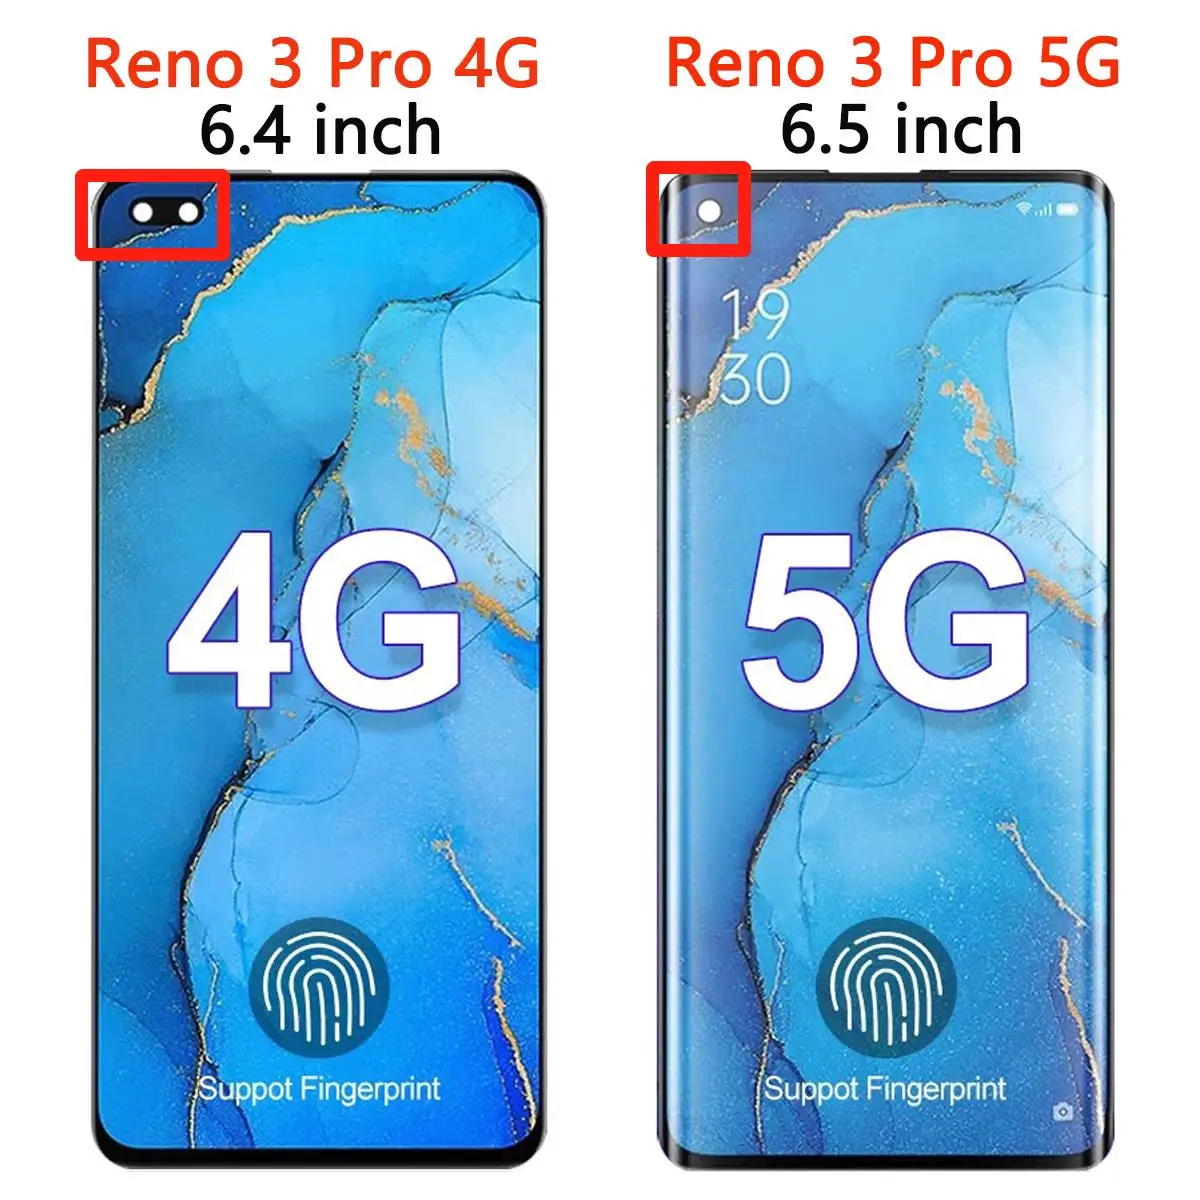 New Original reno3 pro Display For OPPO Reno 3 Pro 4G CPH2035 CPH2036 Reno 3 Pro 5G CPH2009 LCD Touch Screen Digitizer Assembly enlarge